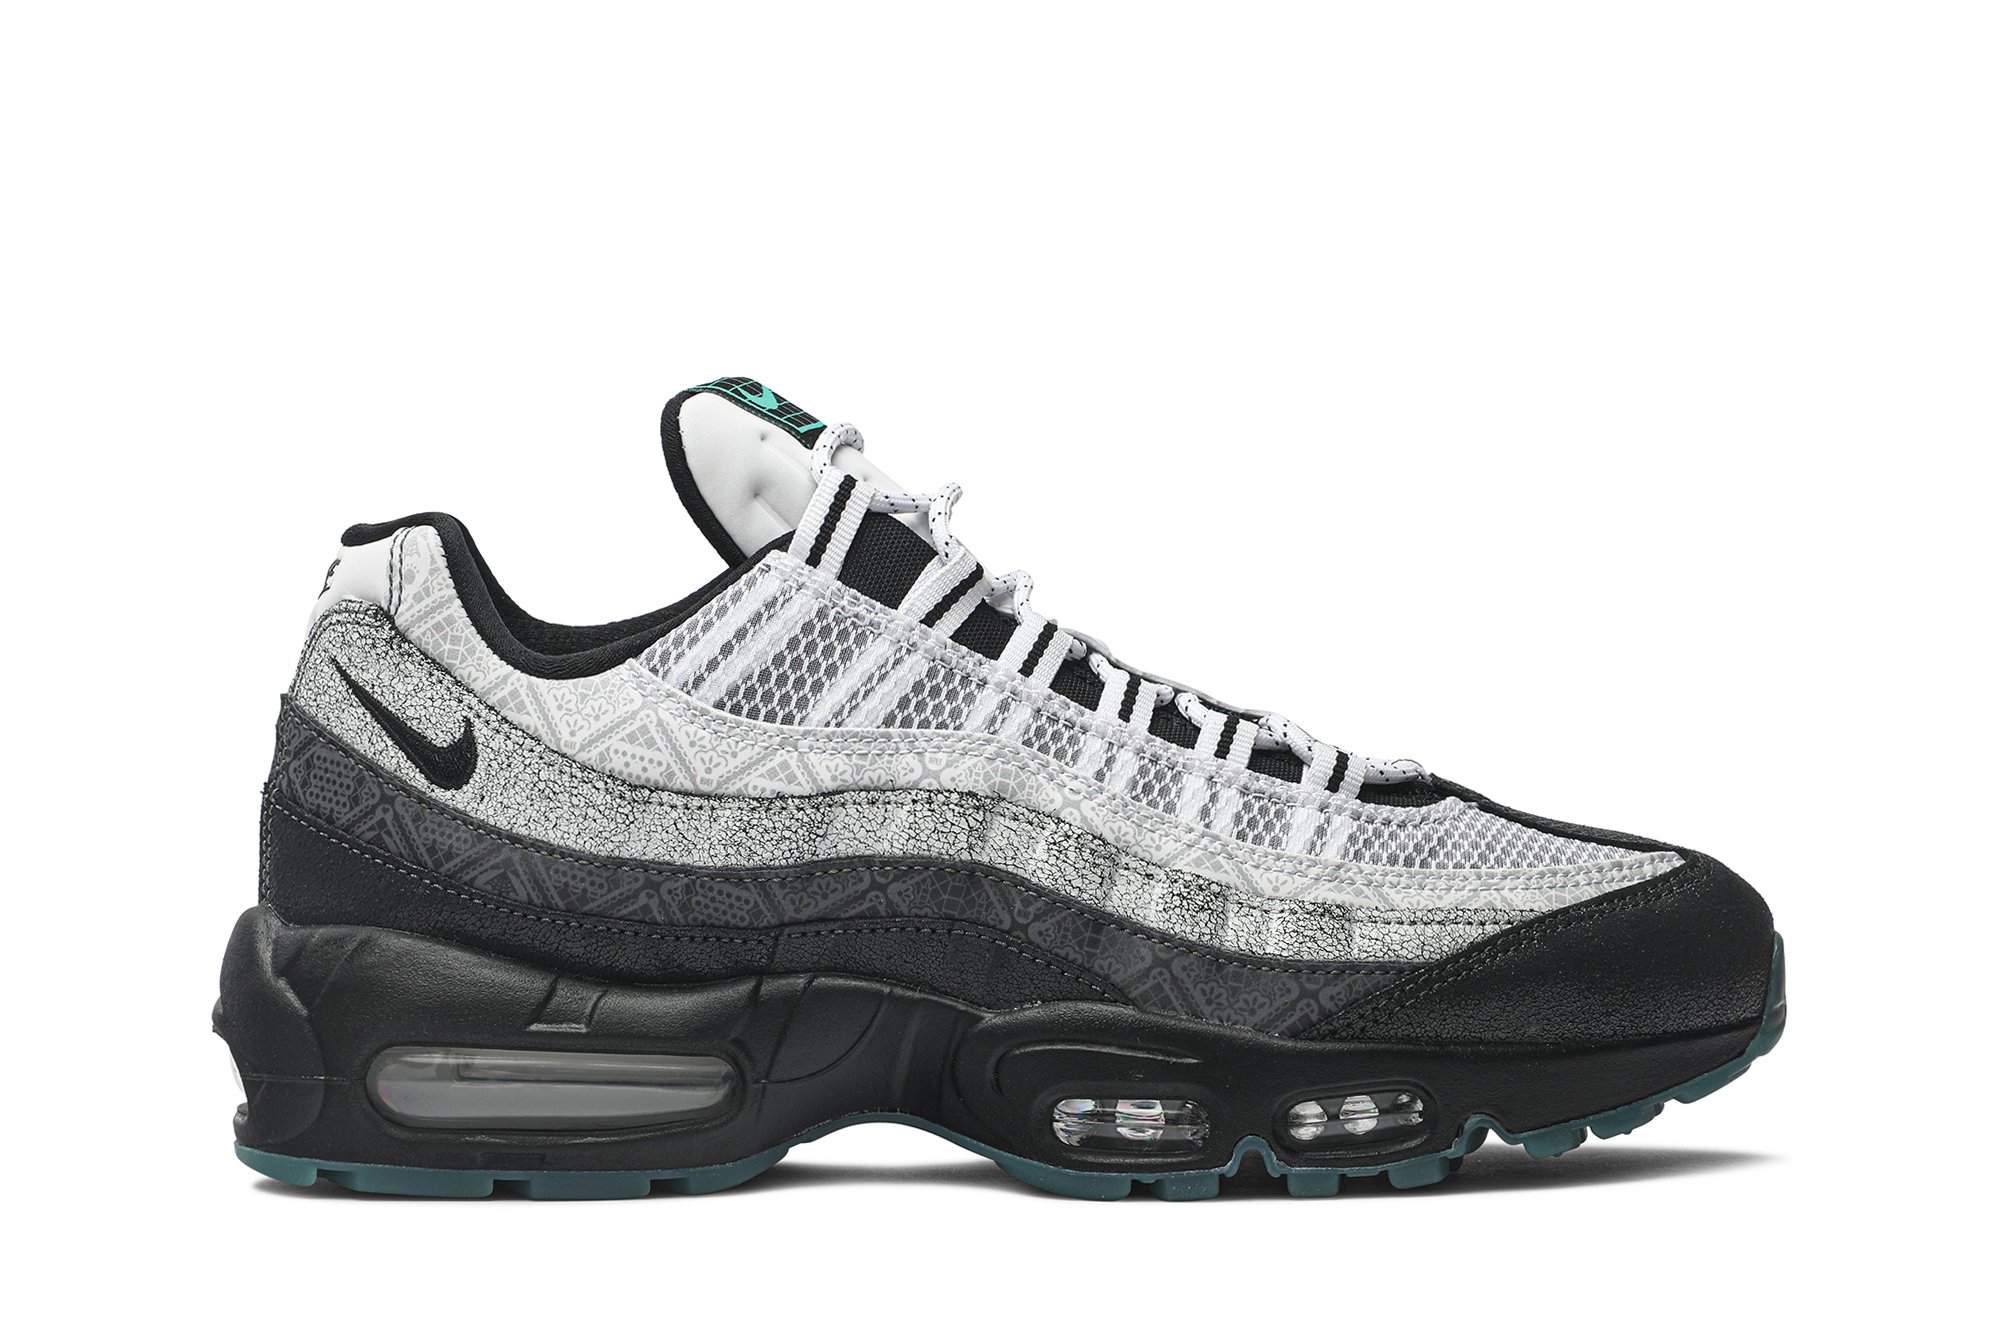 Buy Air Max 95 SE 'Day of the Dead' - CT1139 001 | GOAT